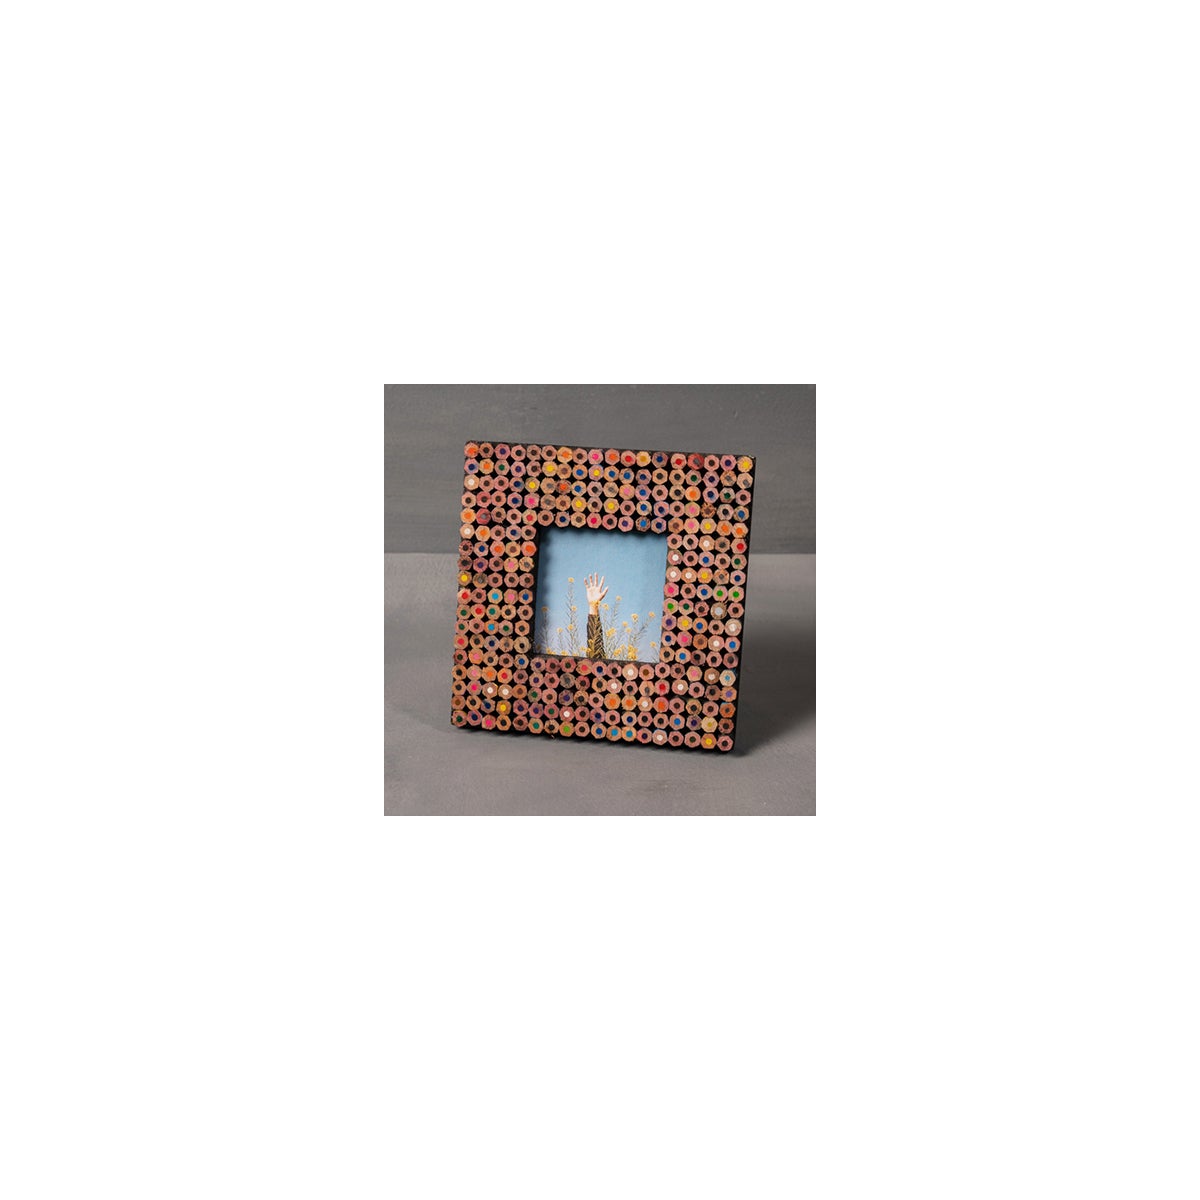 Colored Pencil Mosaic Frame